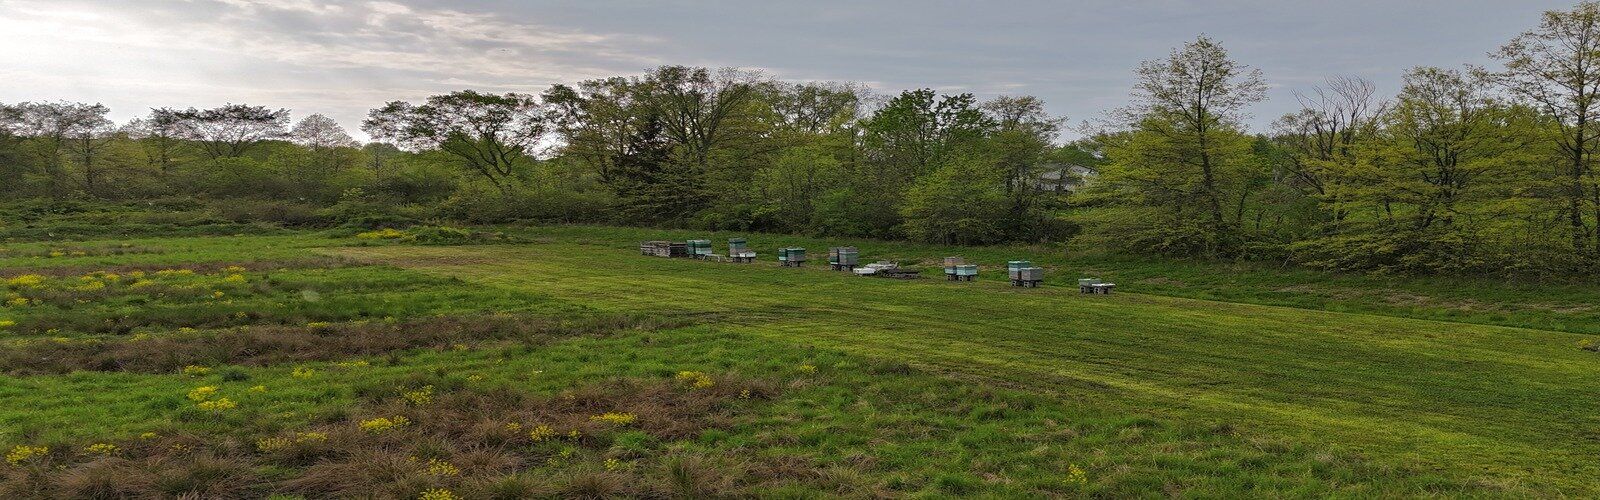 Drone shot of Bosco's Bees Apiary.